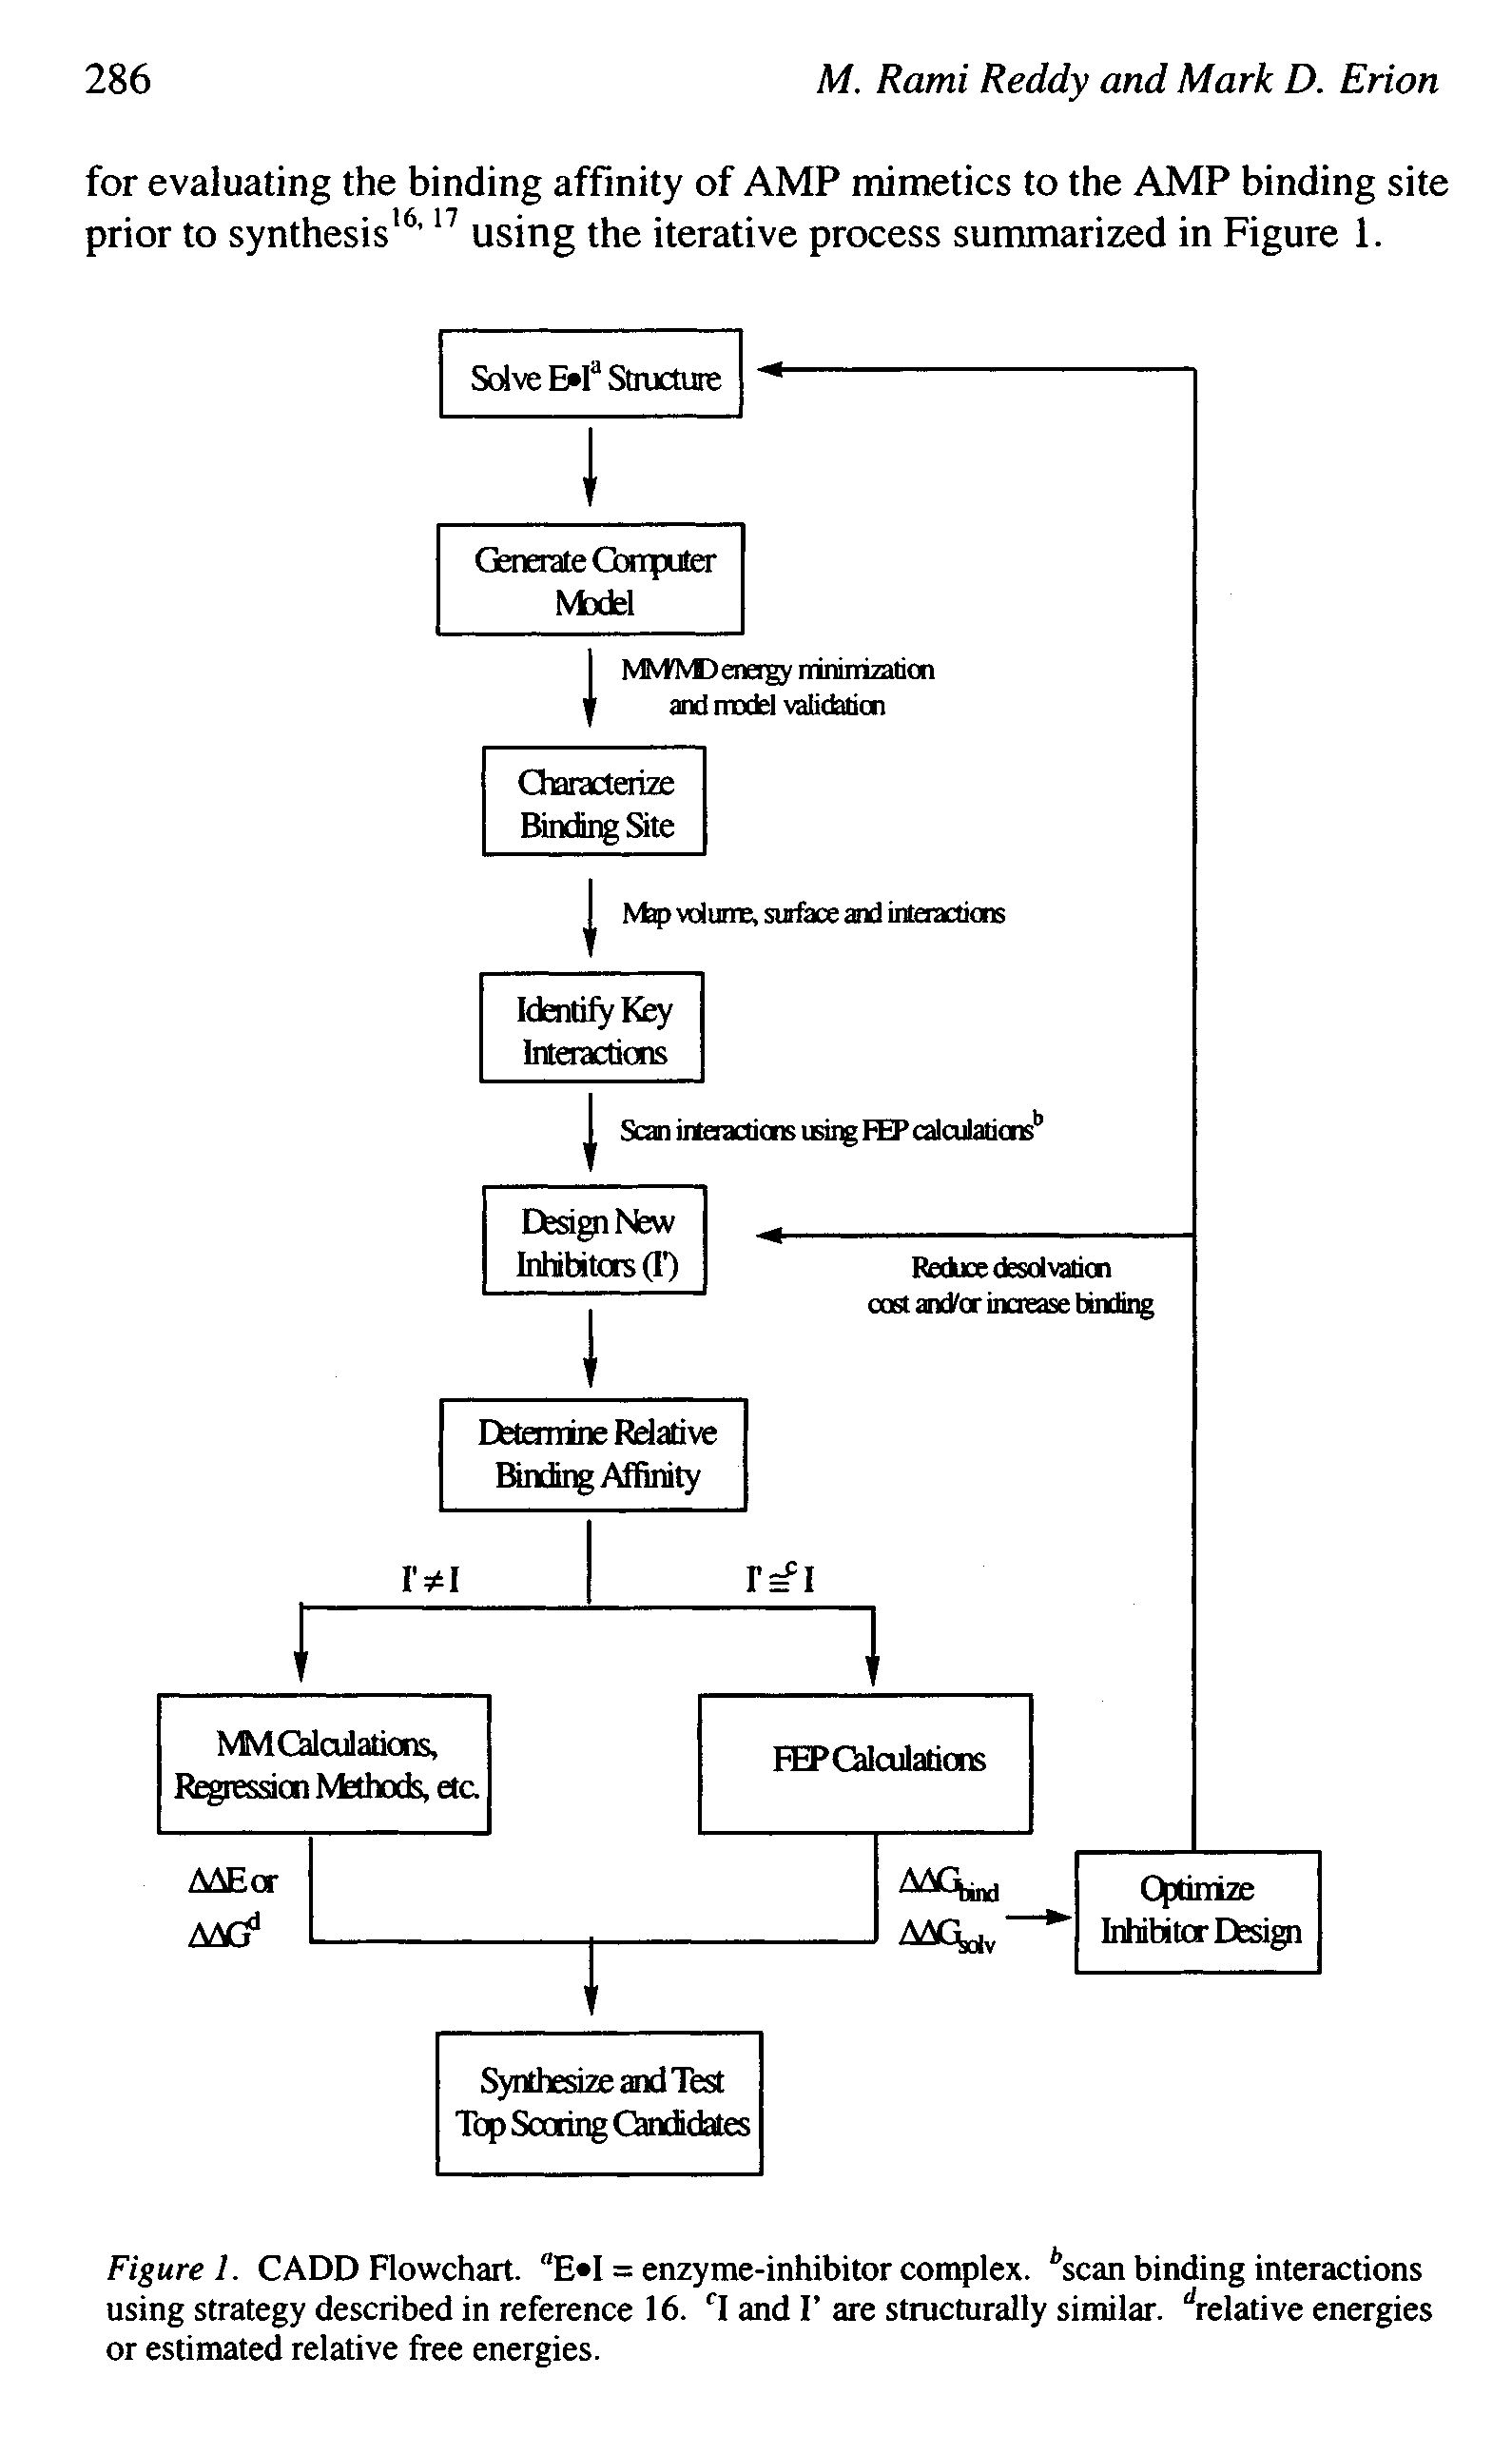 Figure 1. CADD Flowchart. "E I = enzyme-inhibitor complex. Ascan binding interactions using strategy described in reference 16. T and I are structurally similar, relative energies or estimated relative free energies.